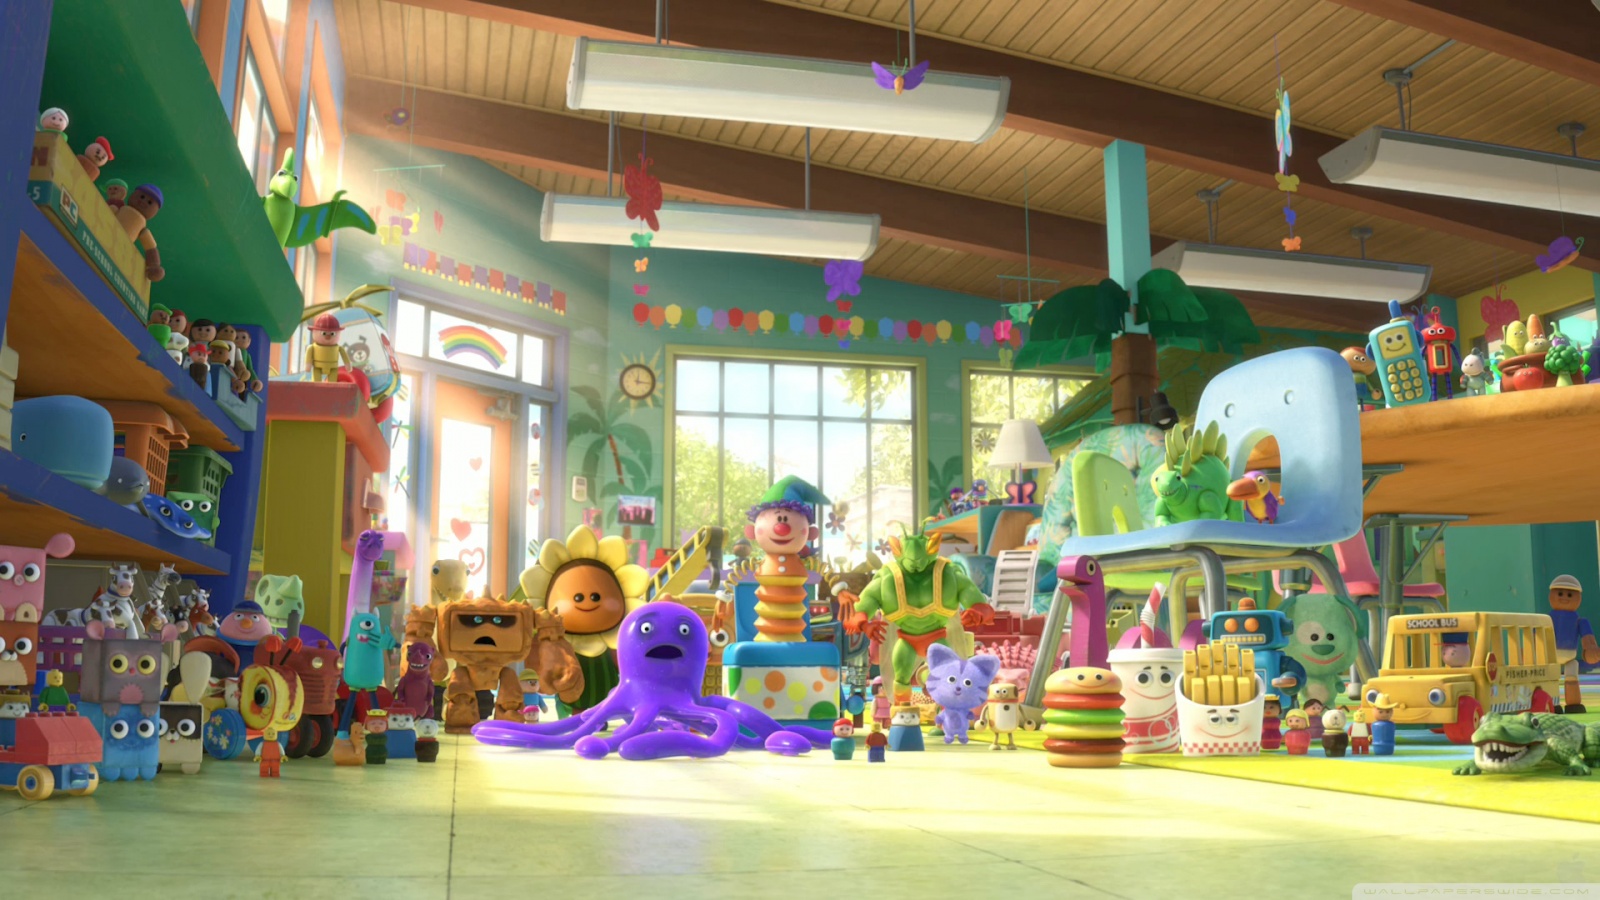 Toy Story 3 New Toys HD desktop wallpaper : High Definition : Mobile